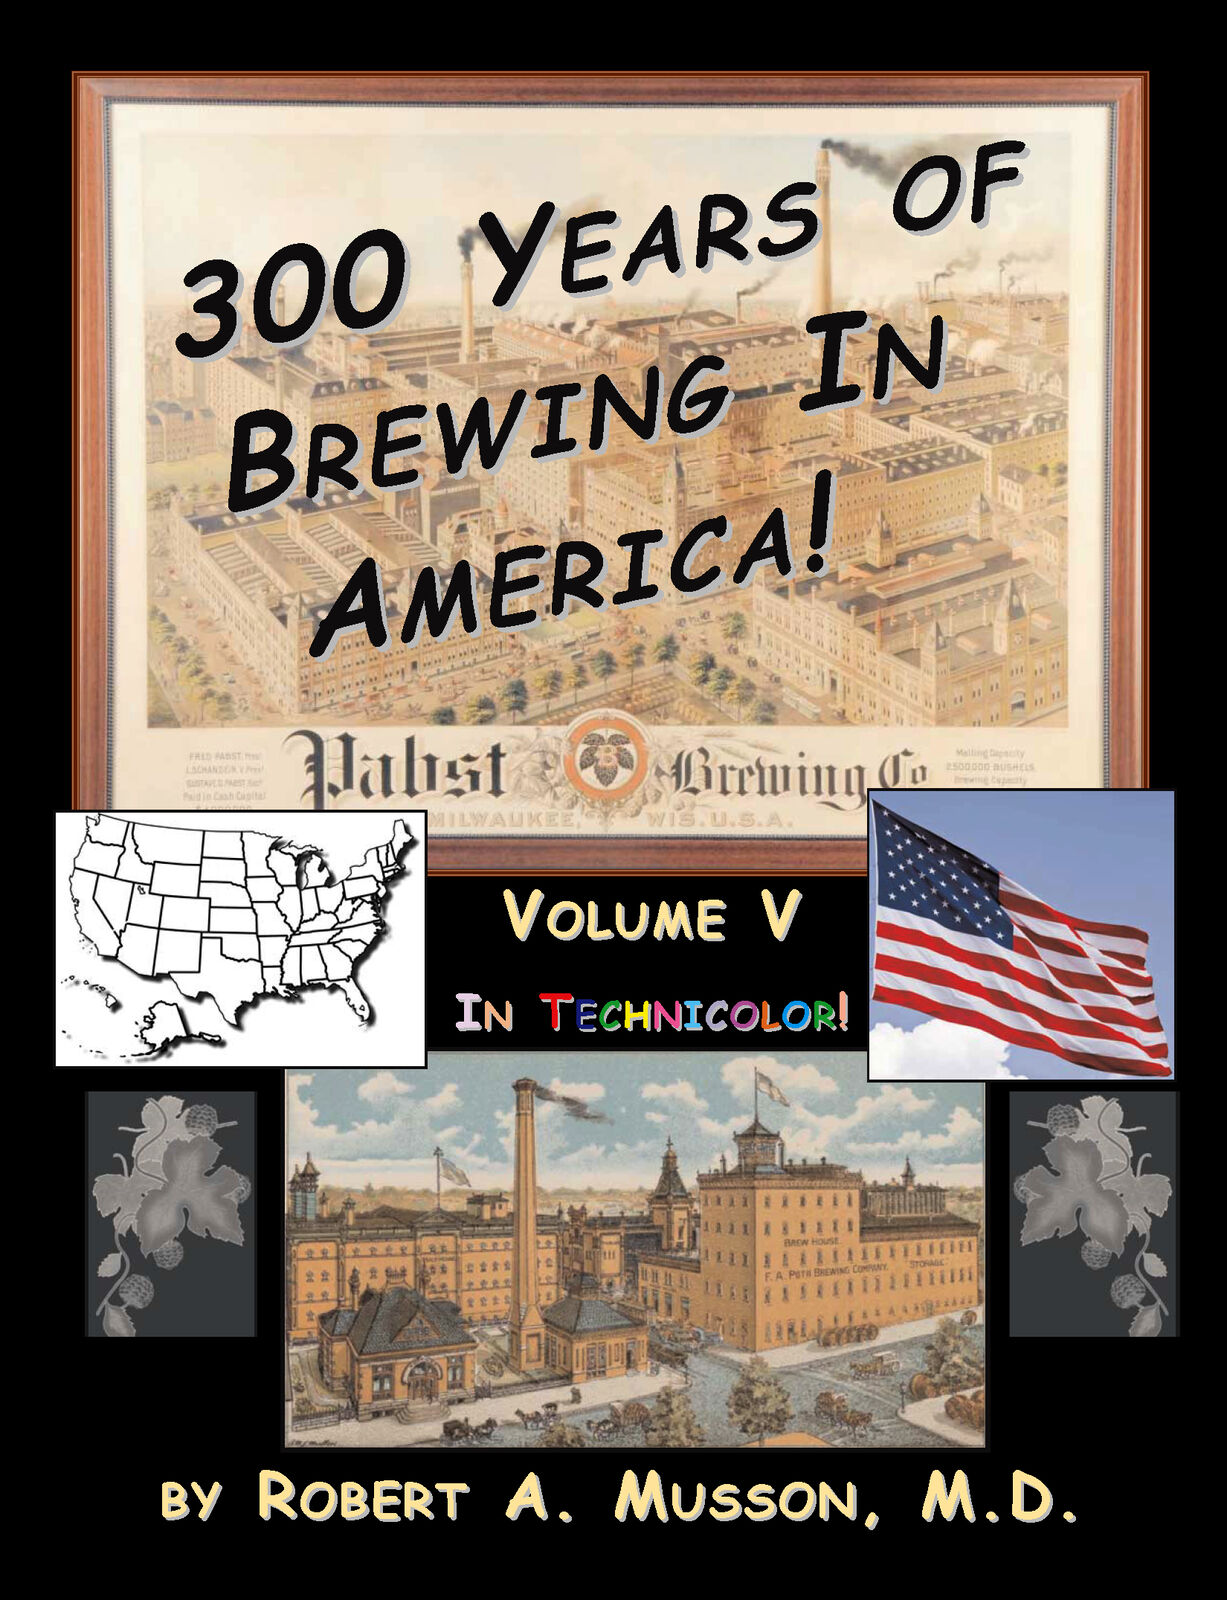 NEW book 300 Years of Brewing in America Color supplement-400+ images,72 pages